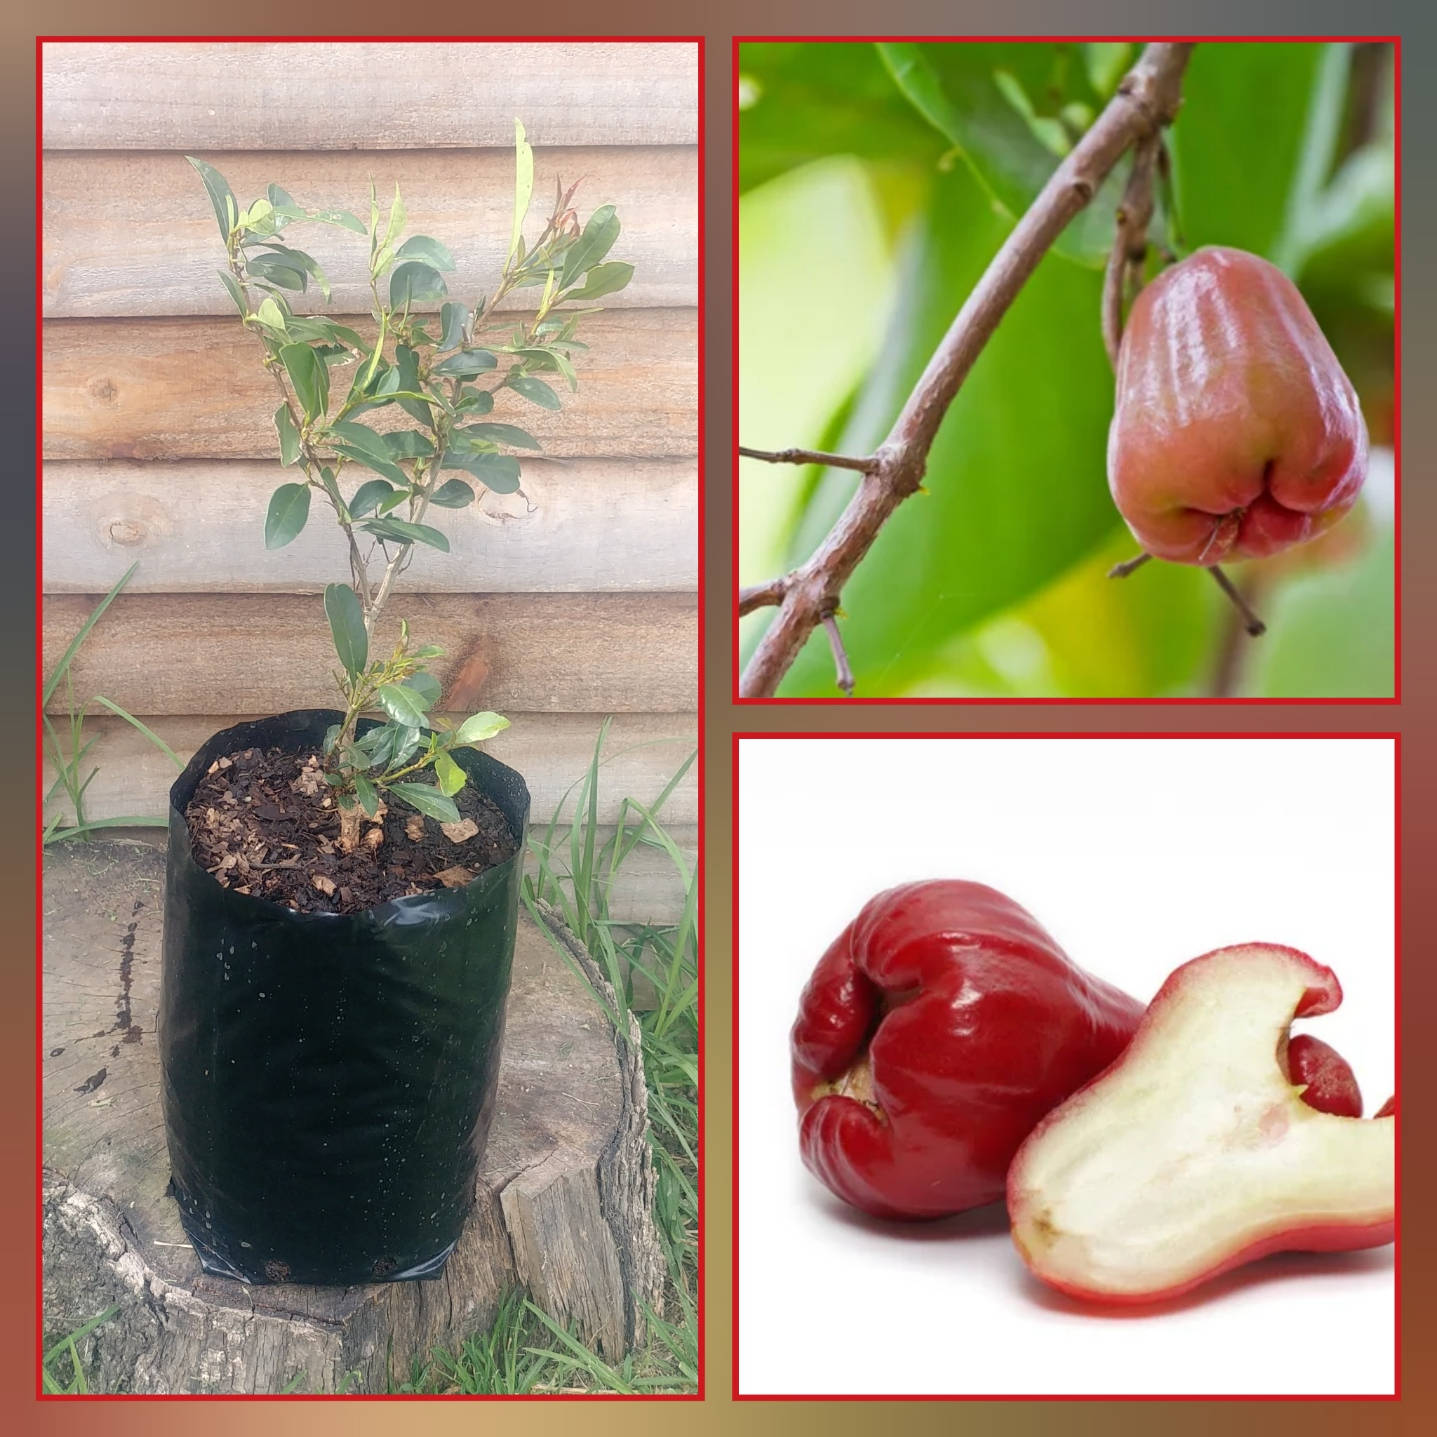 Rose Apple Plant And Fruits Wallpaper